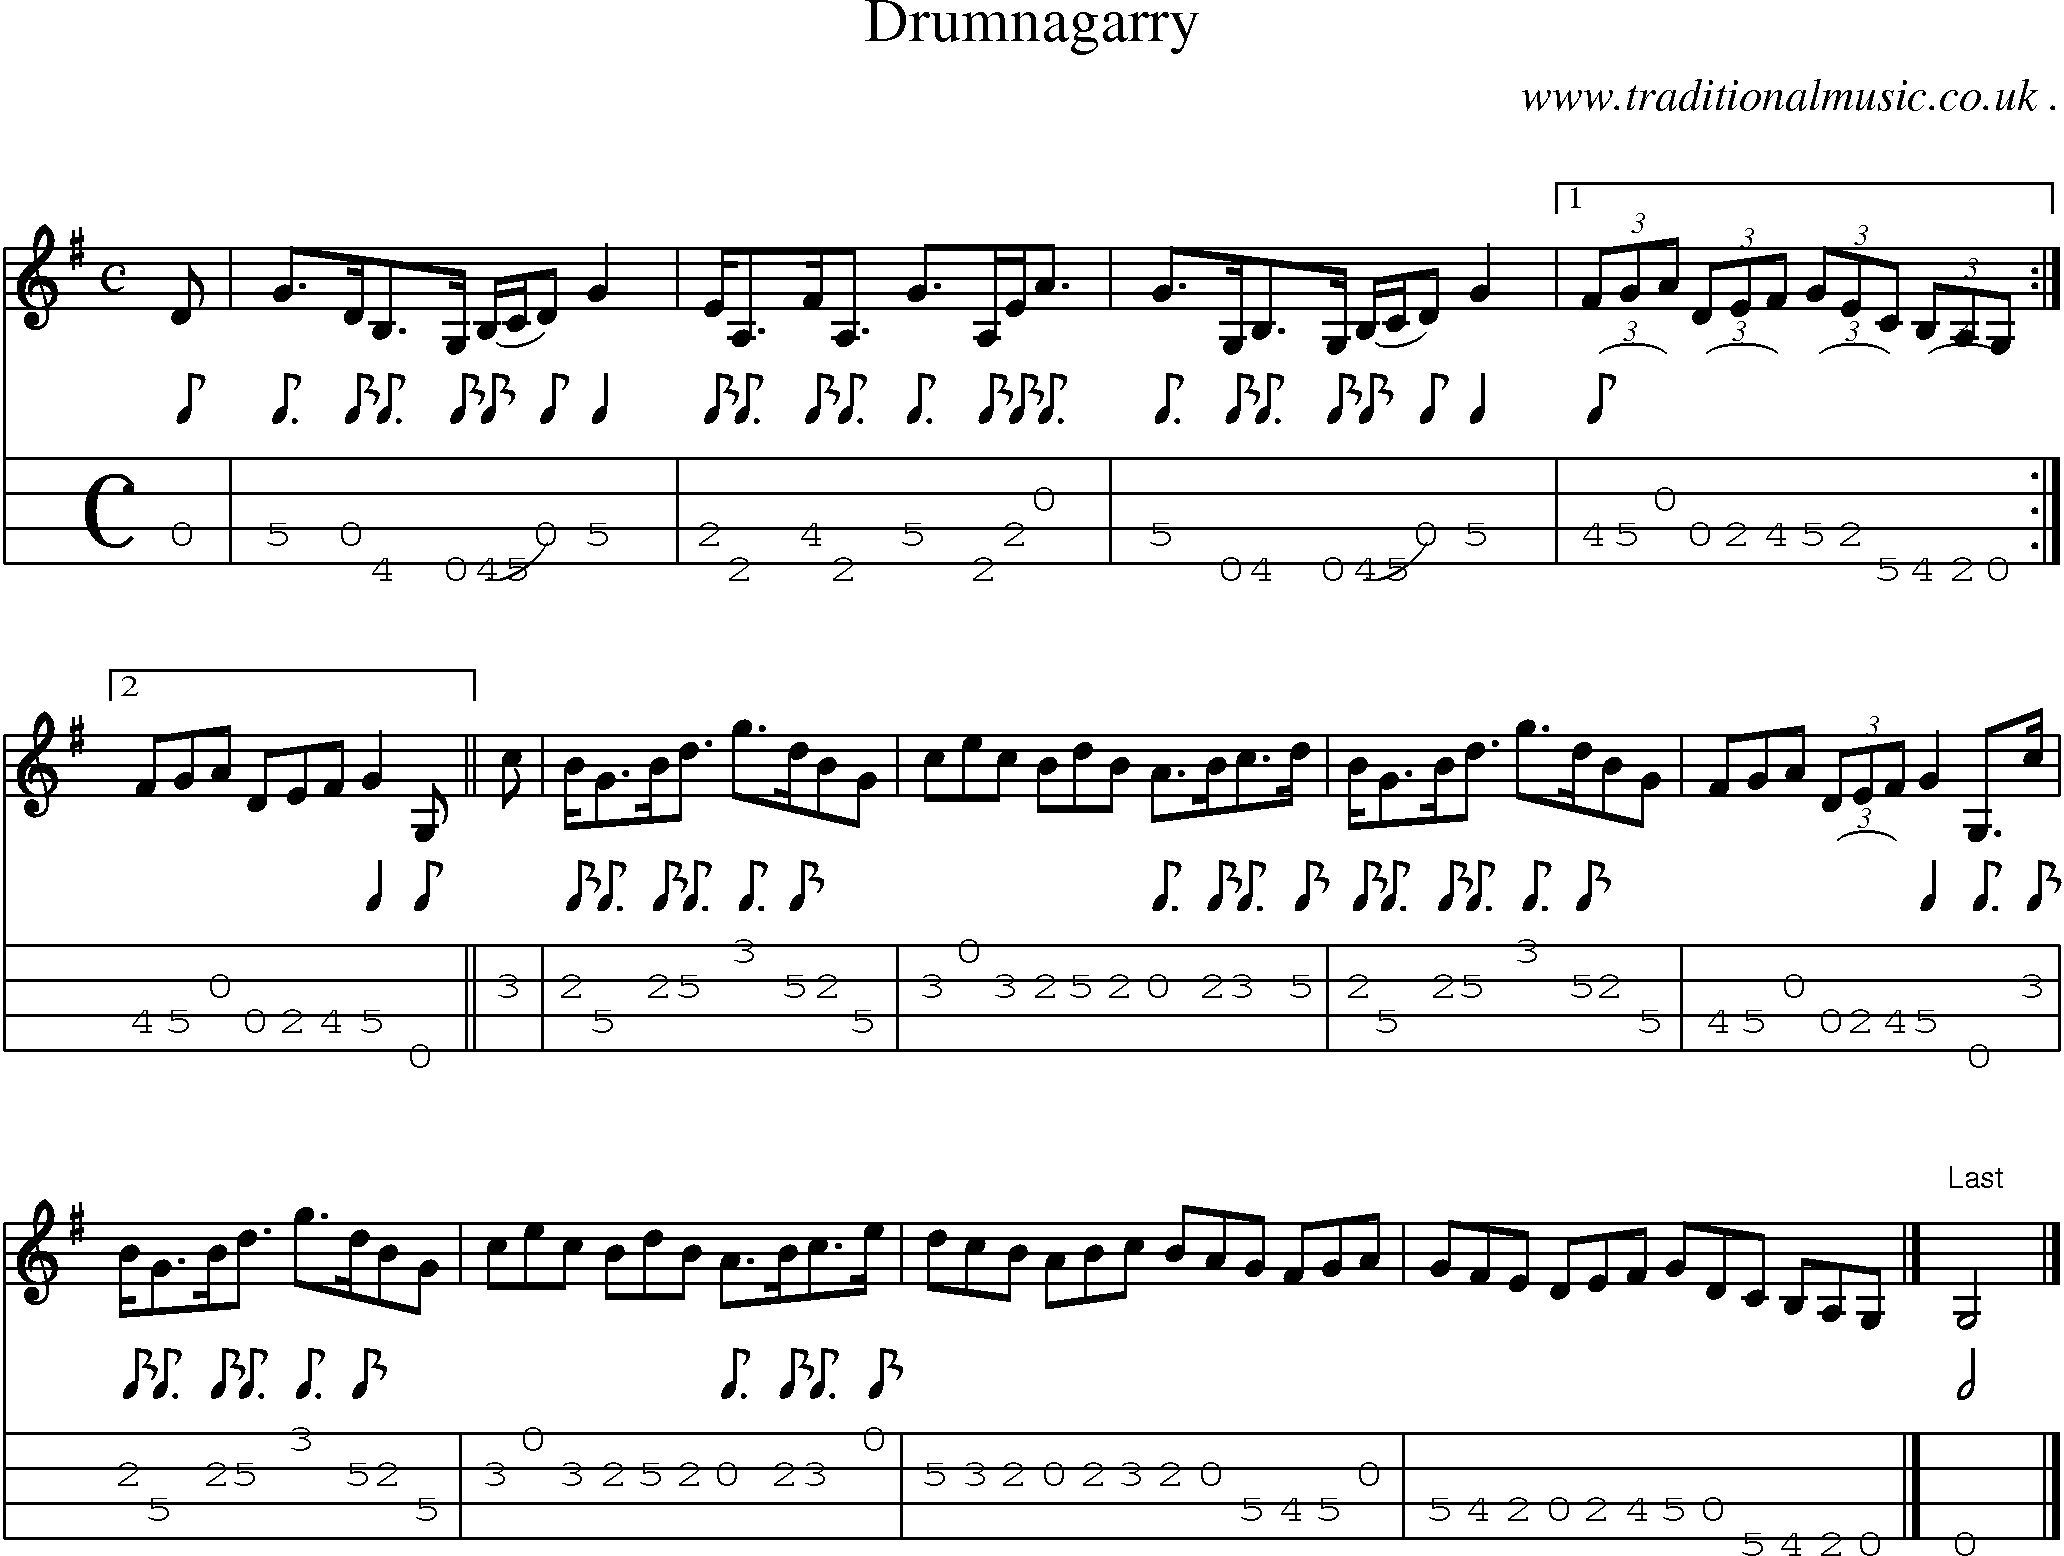 Sheet-music  score, Chords and Mandolin Tabs for Drumnagarry